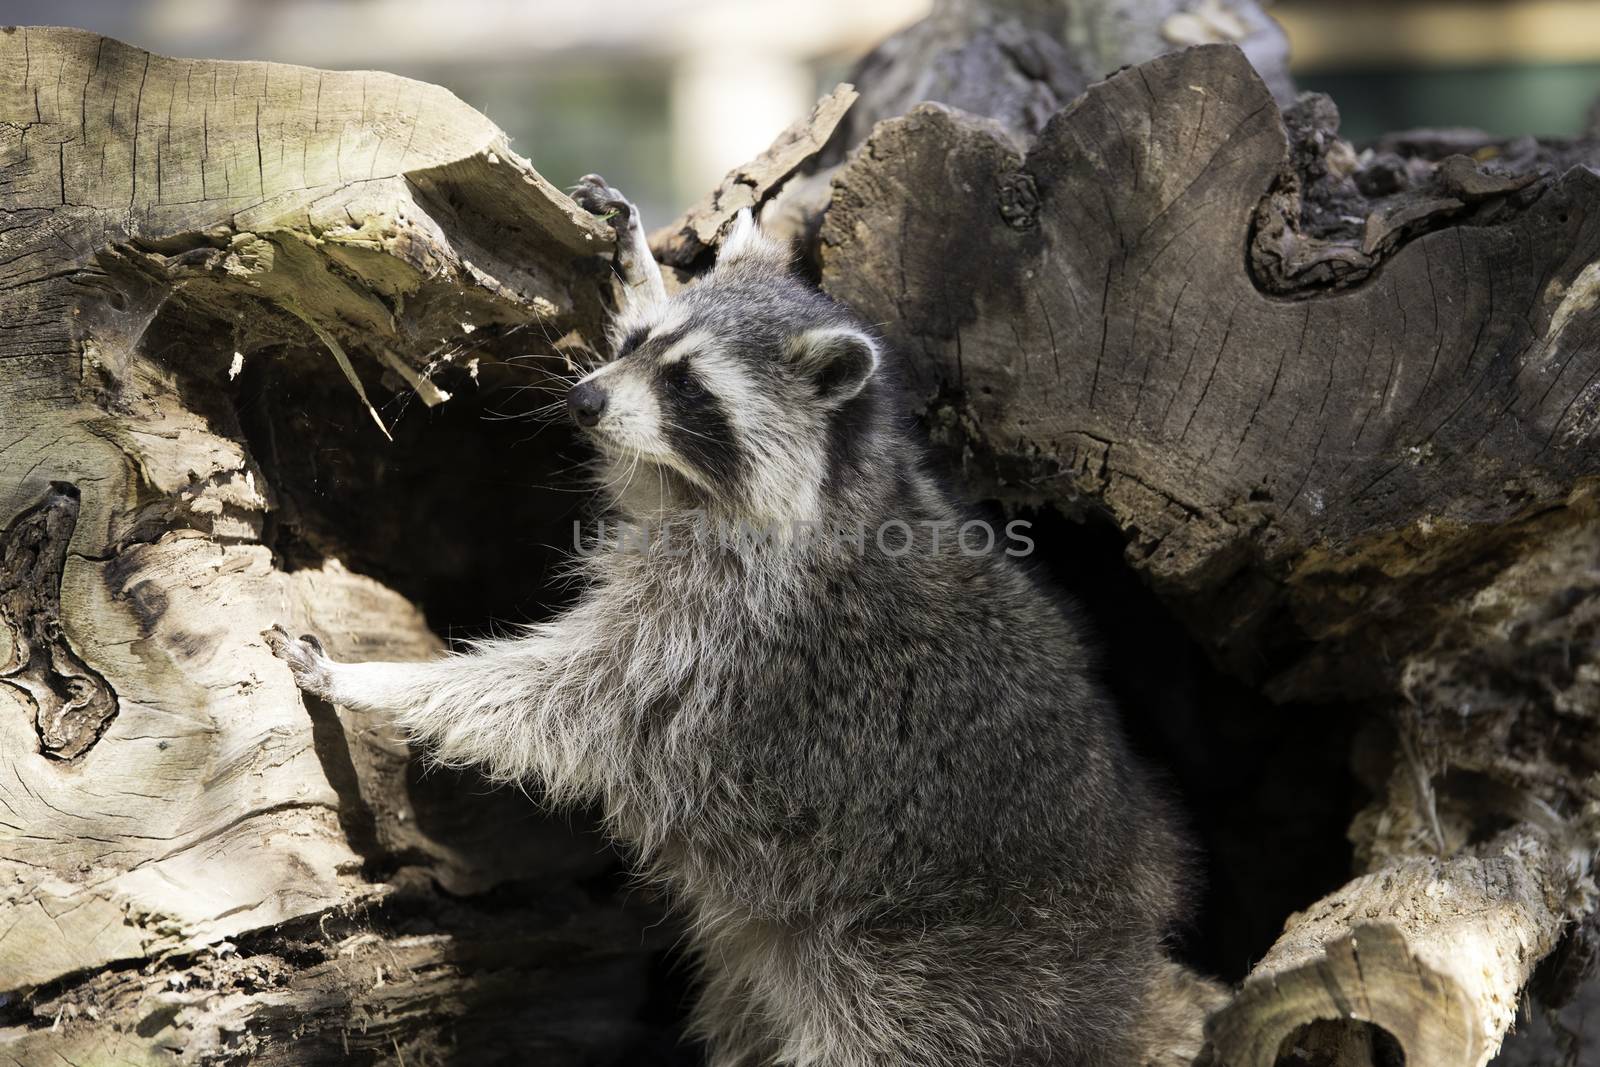 Racoon climbing out of hollow tree trunk